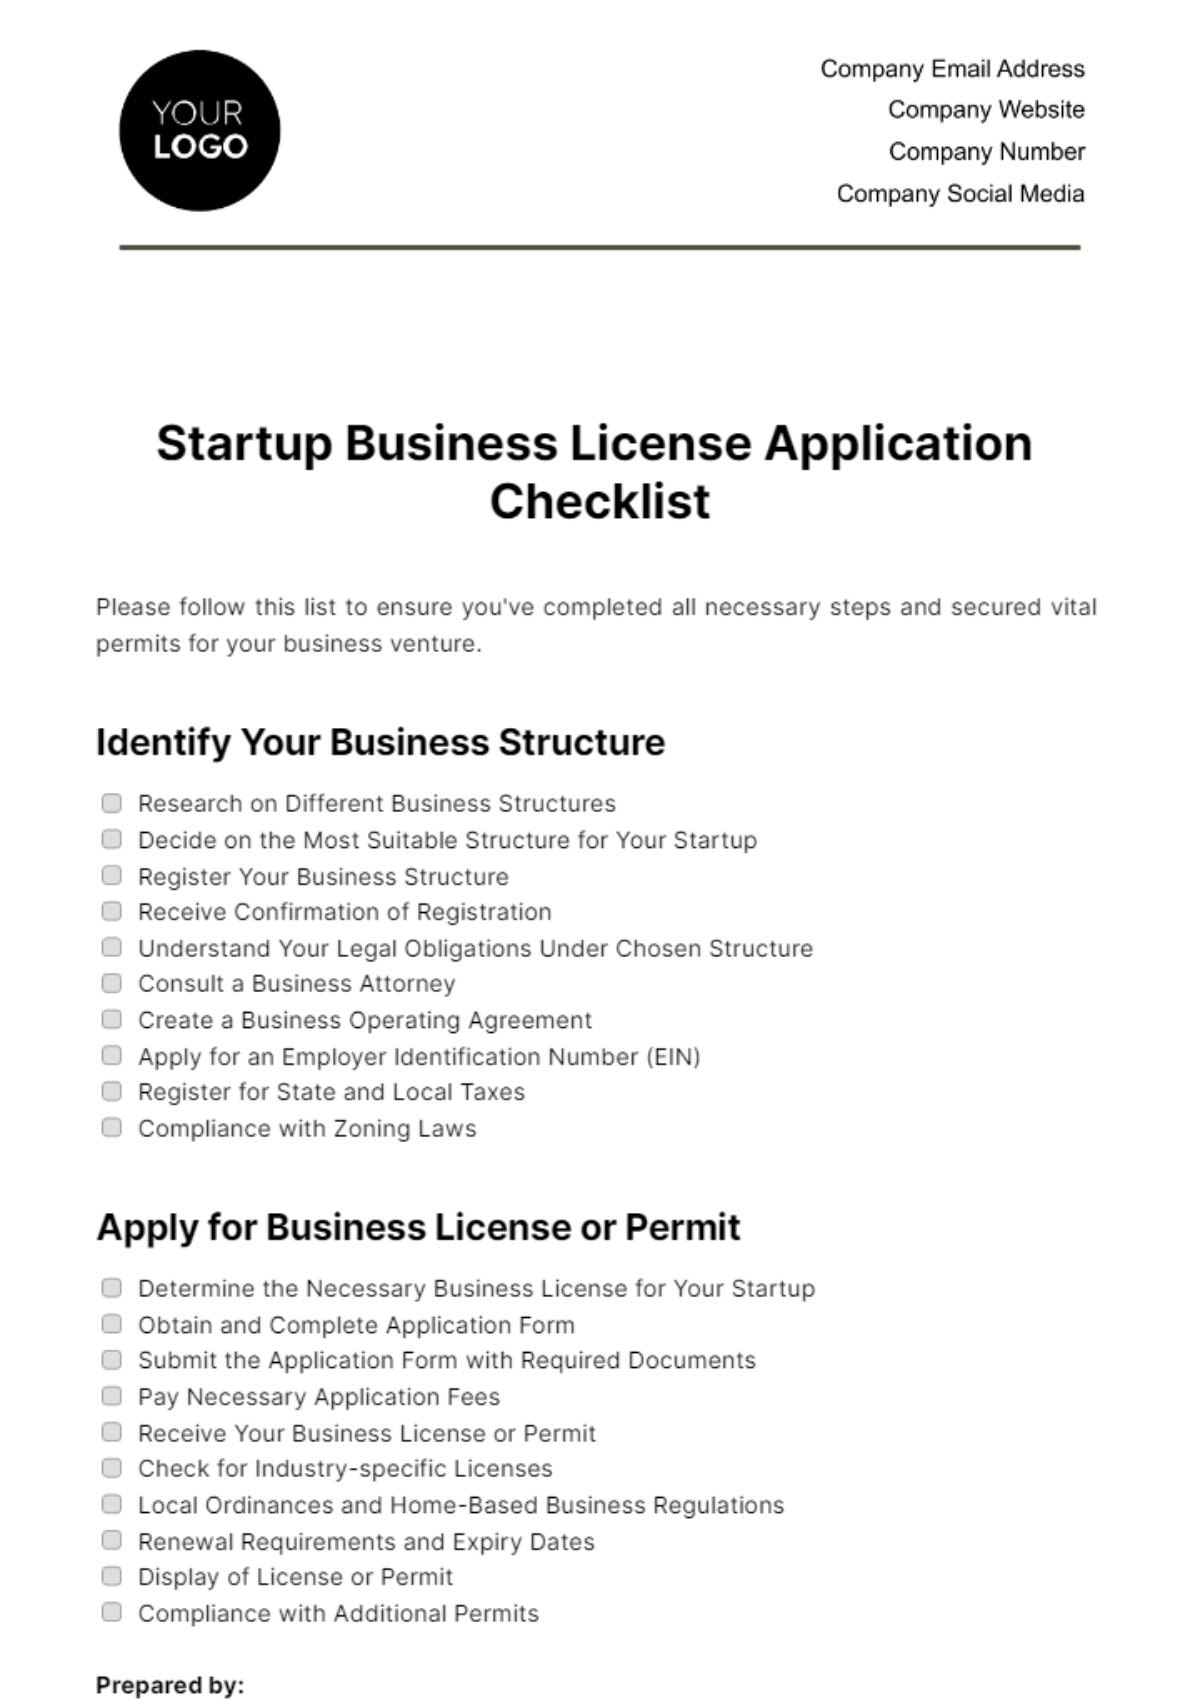 Startup Business License Application Checklist Template